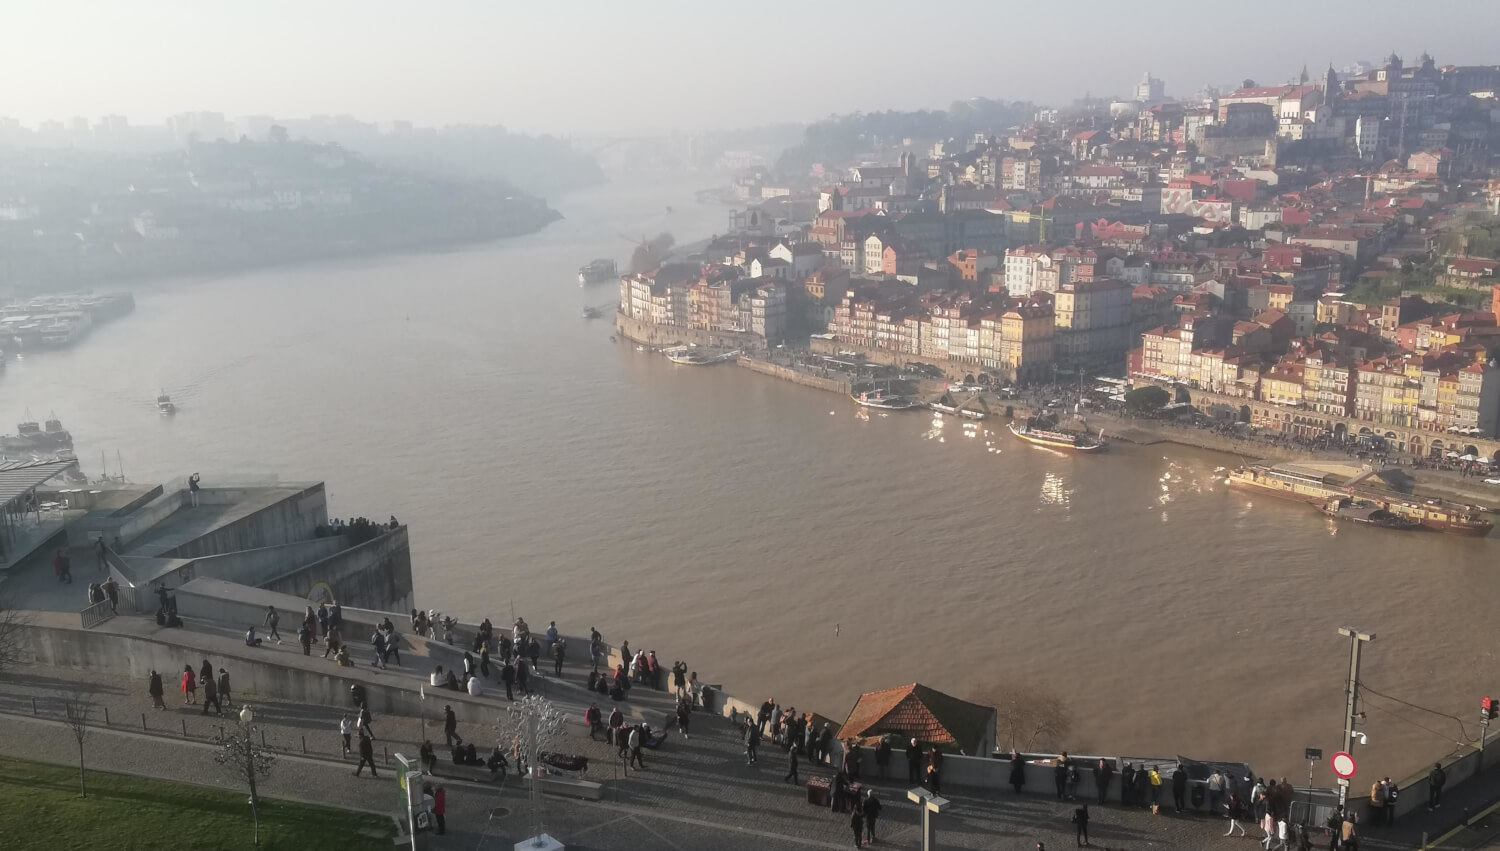 Beautiful Porto seen from the monastery across the river